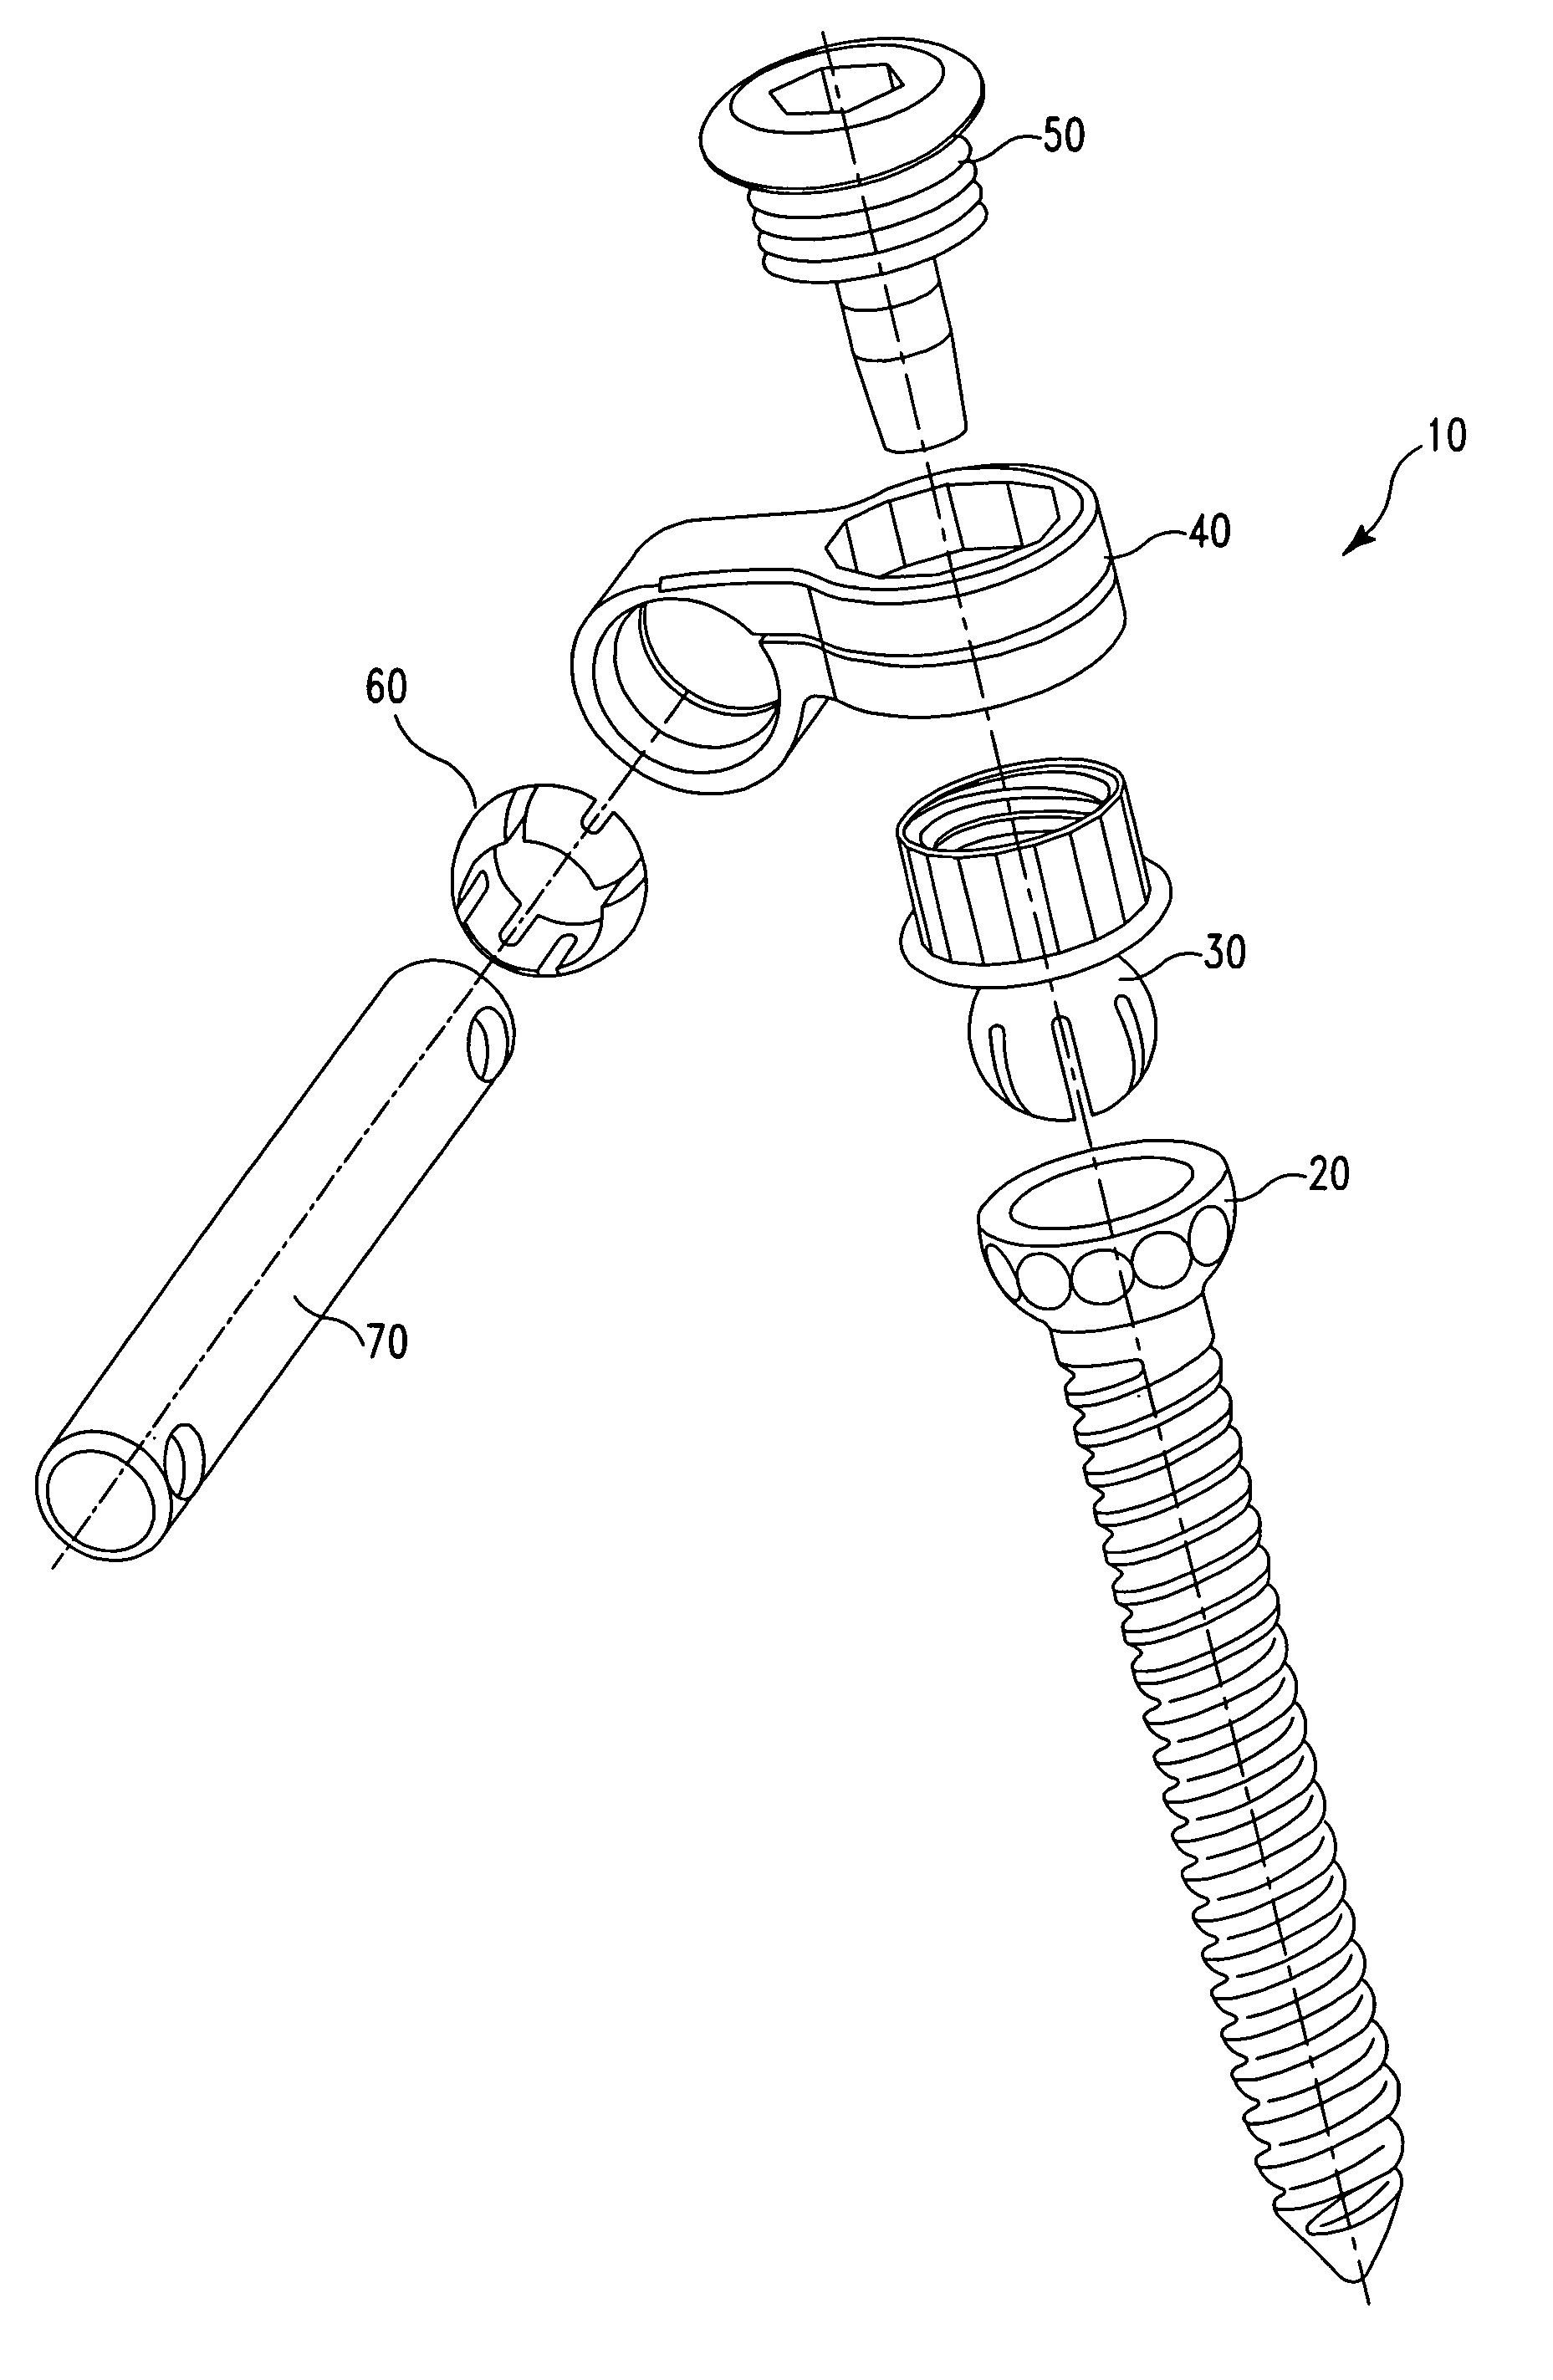 Medialised rod pedicle screw assembly